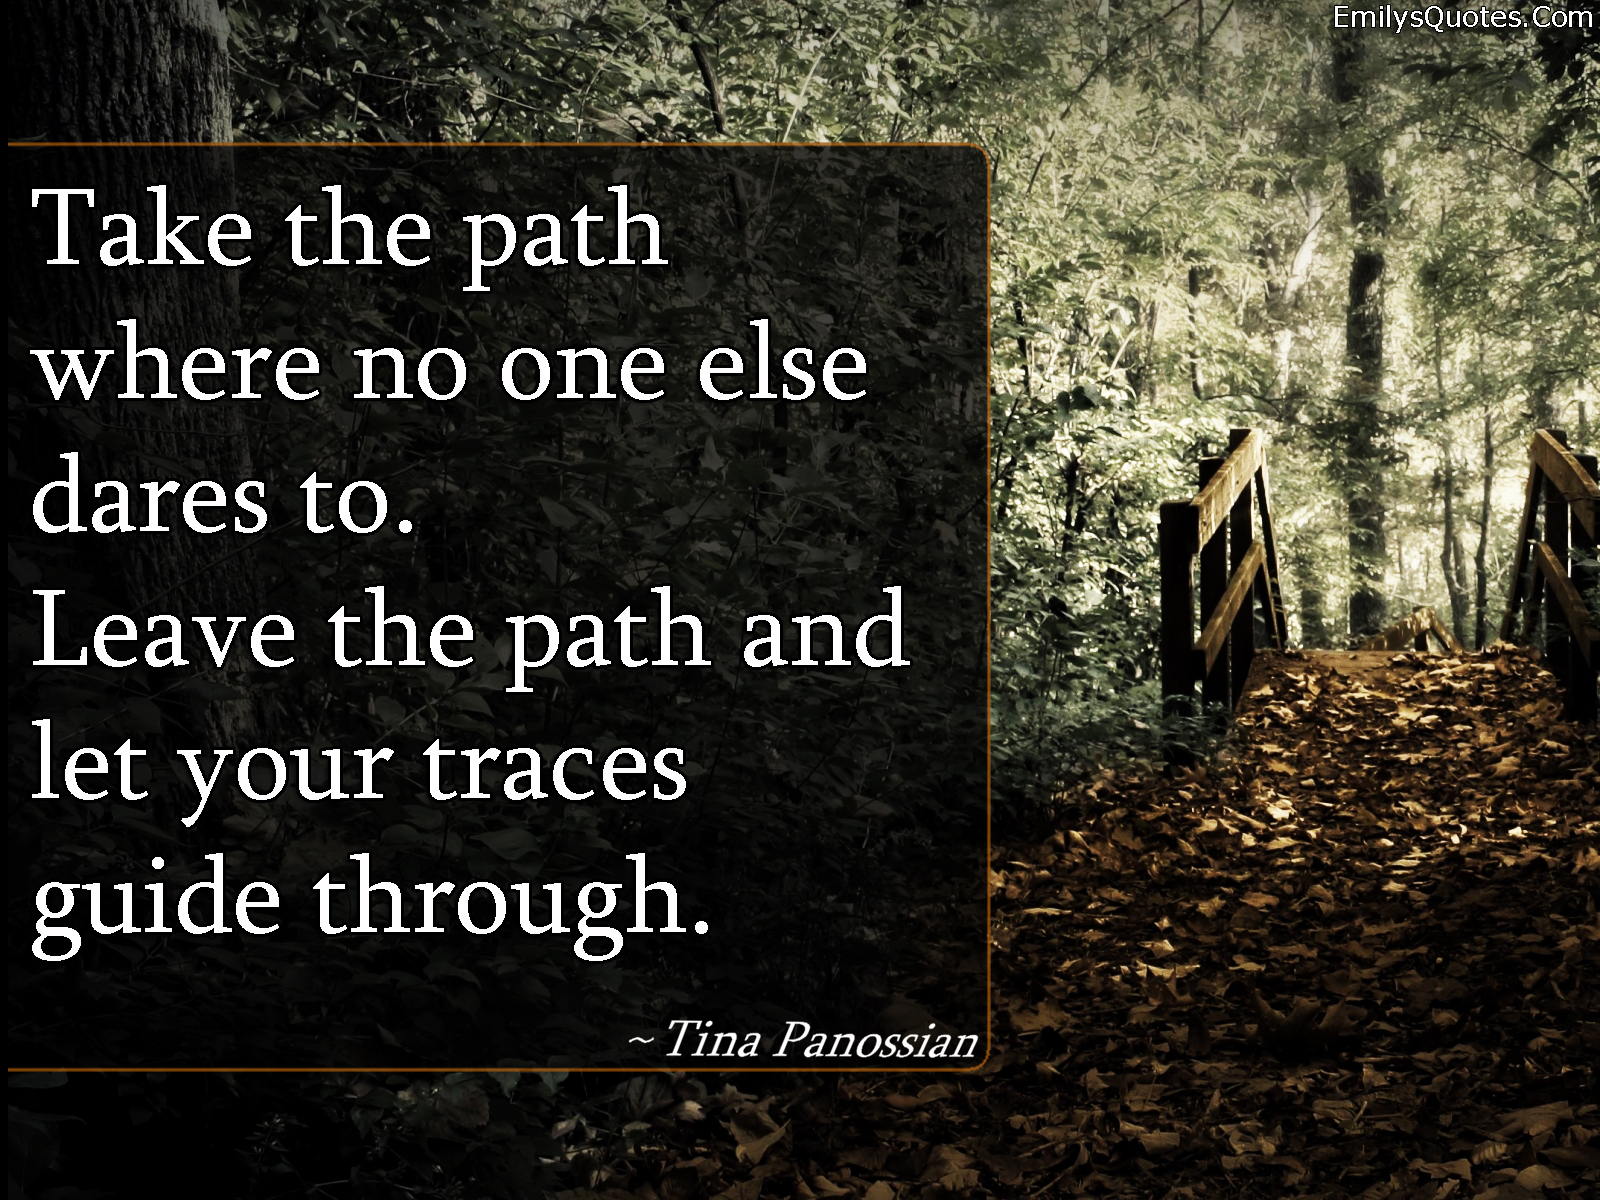 Take the path where no one else dares to. Leave the path and let your traces guide through